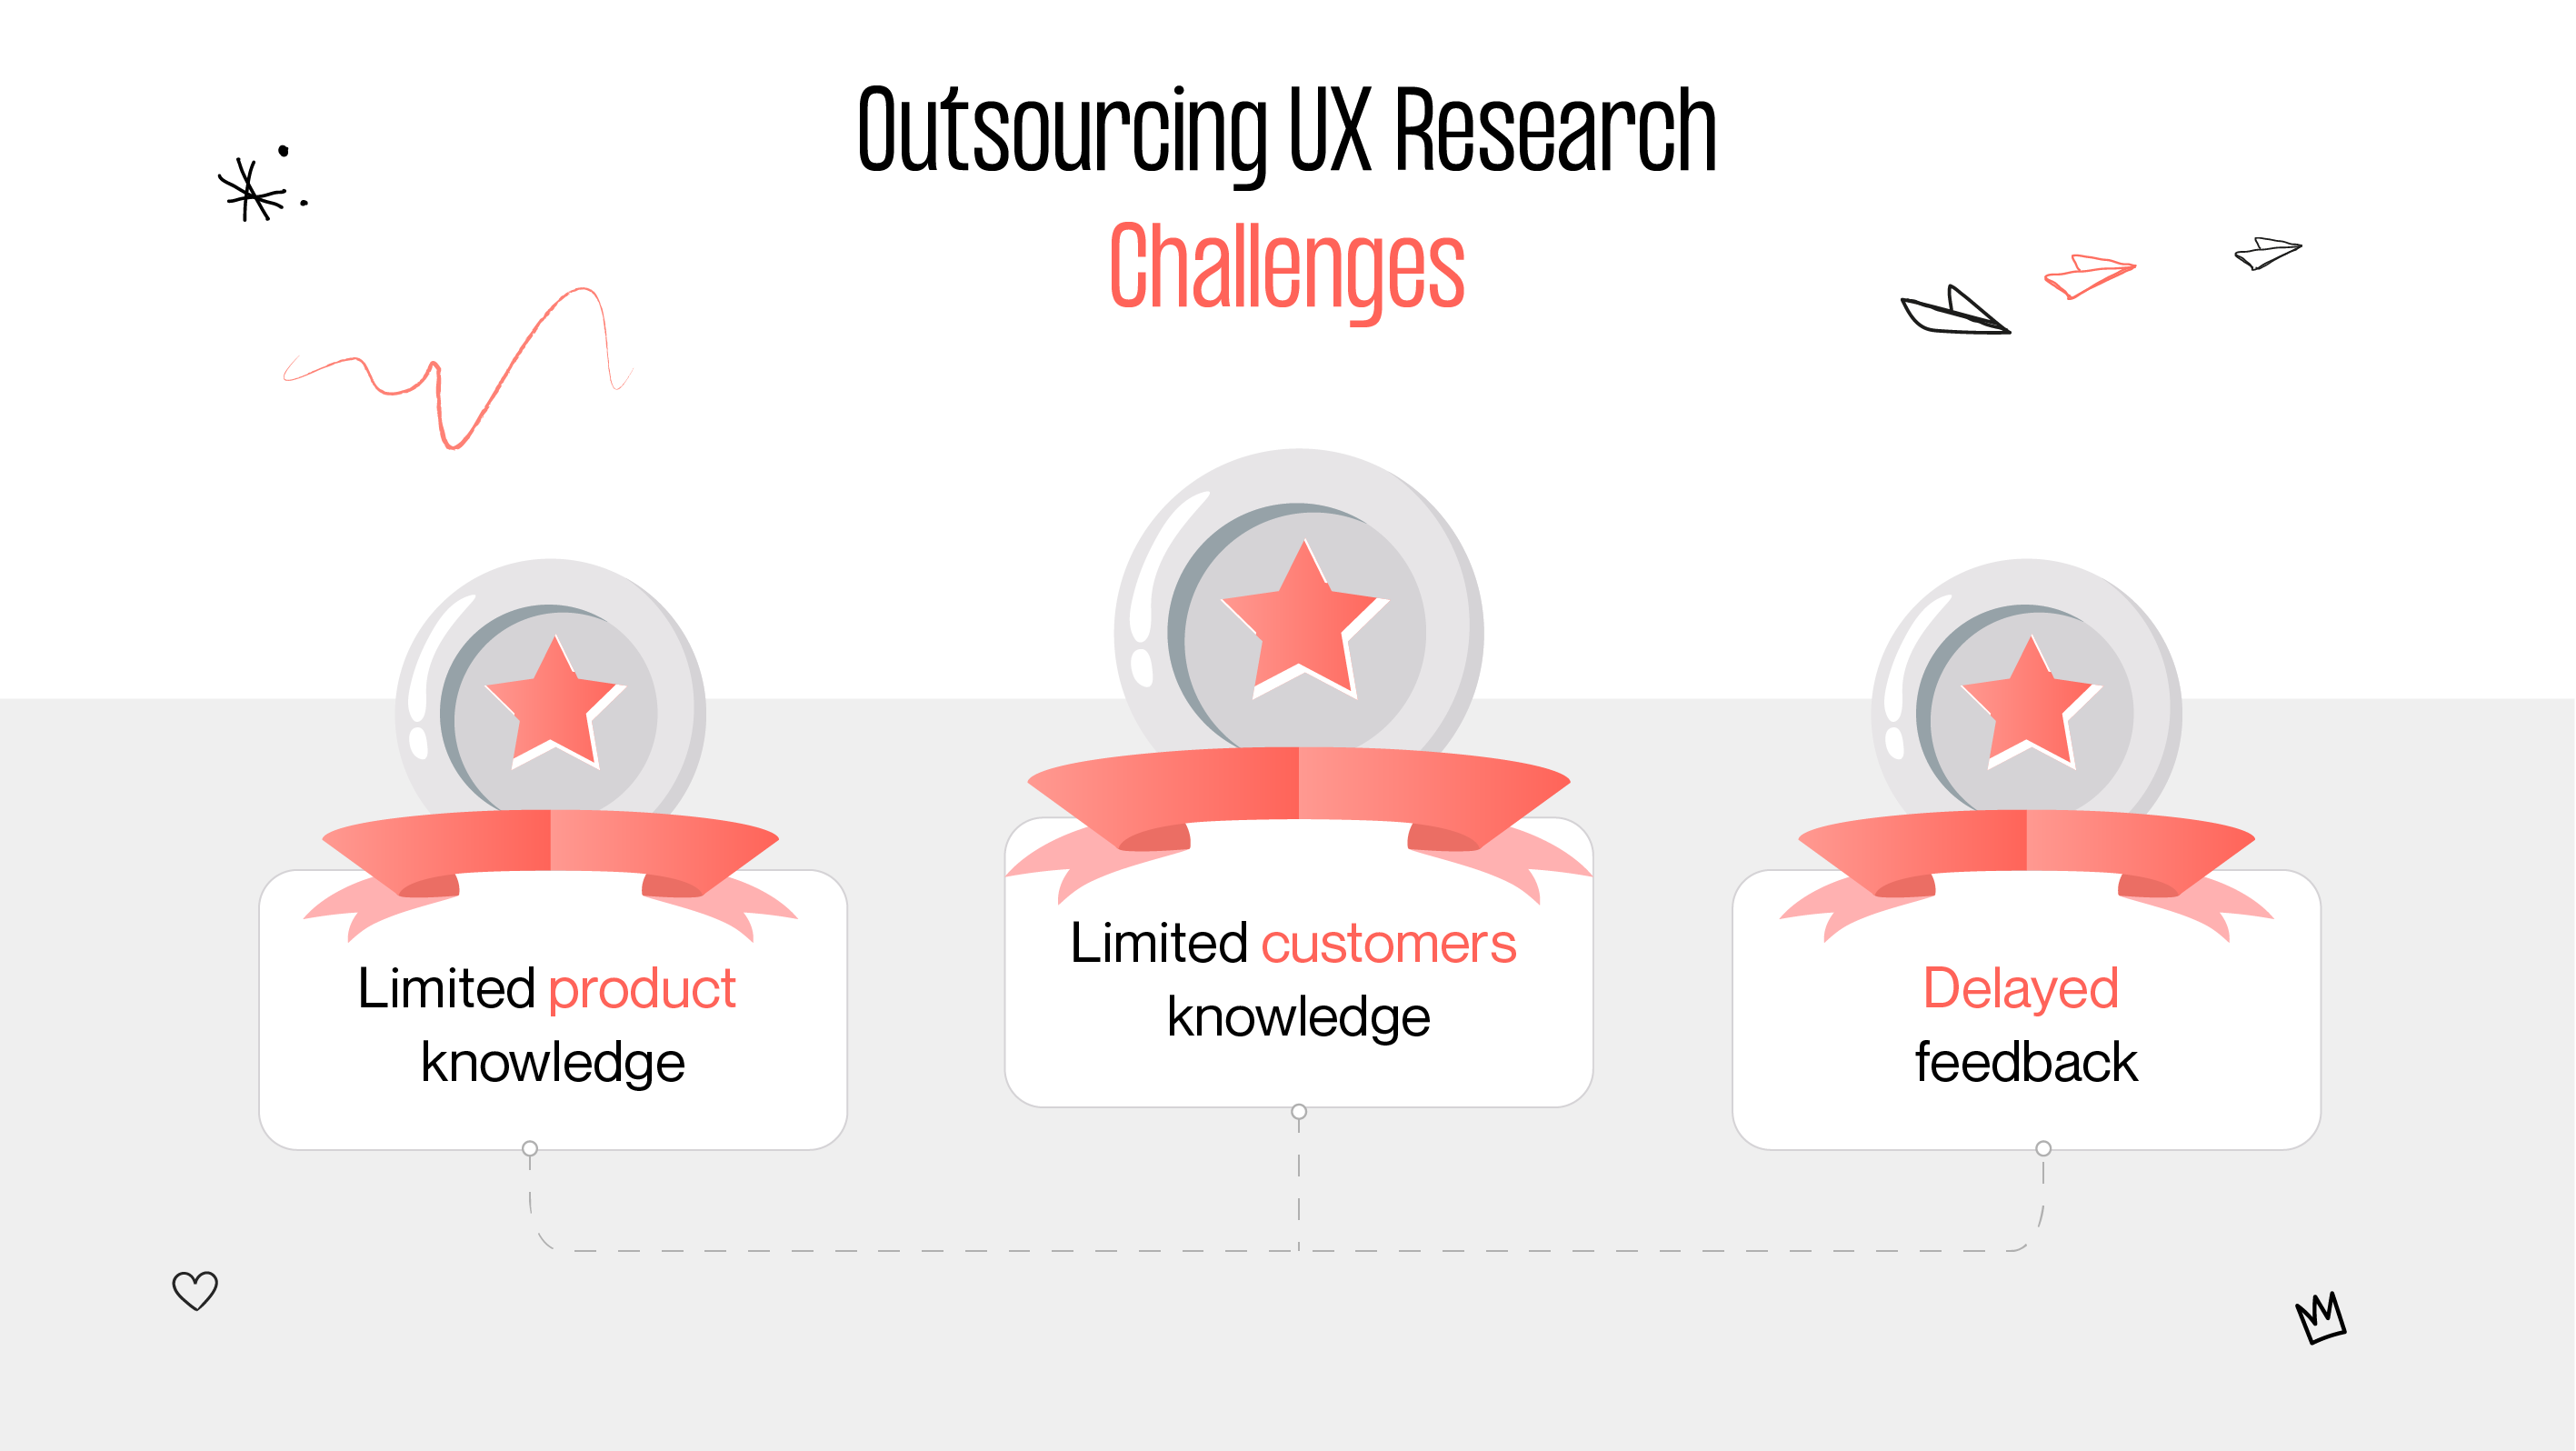 challenges of outsource ux research